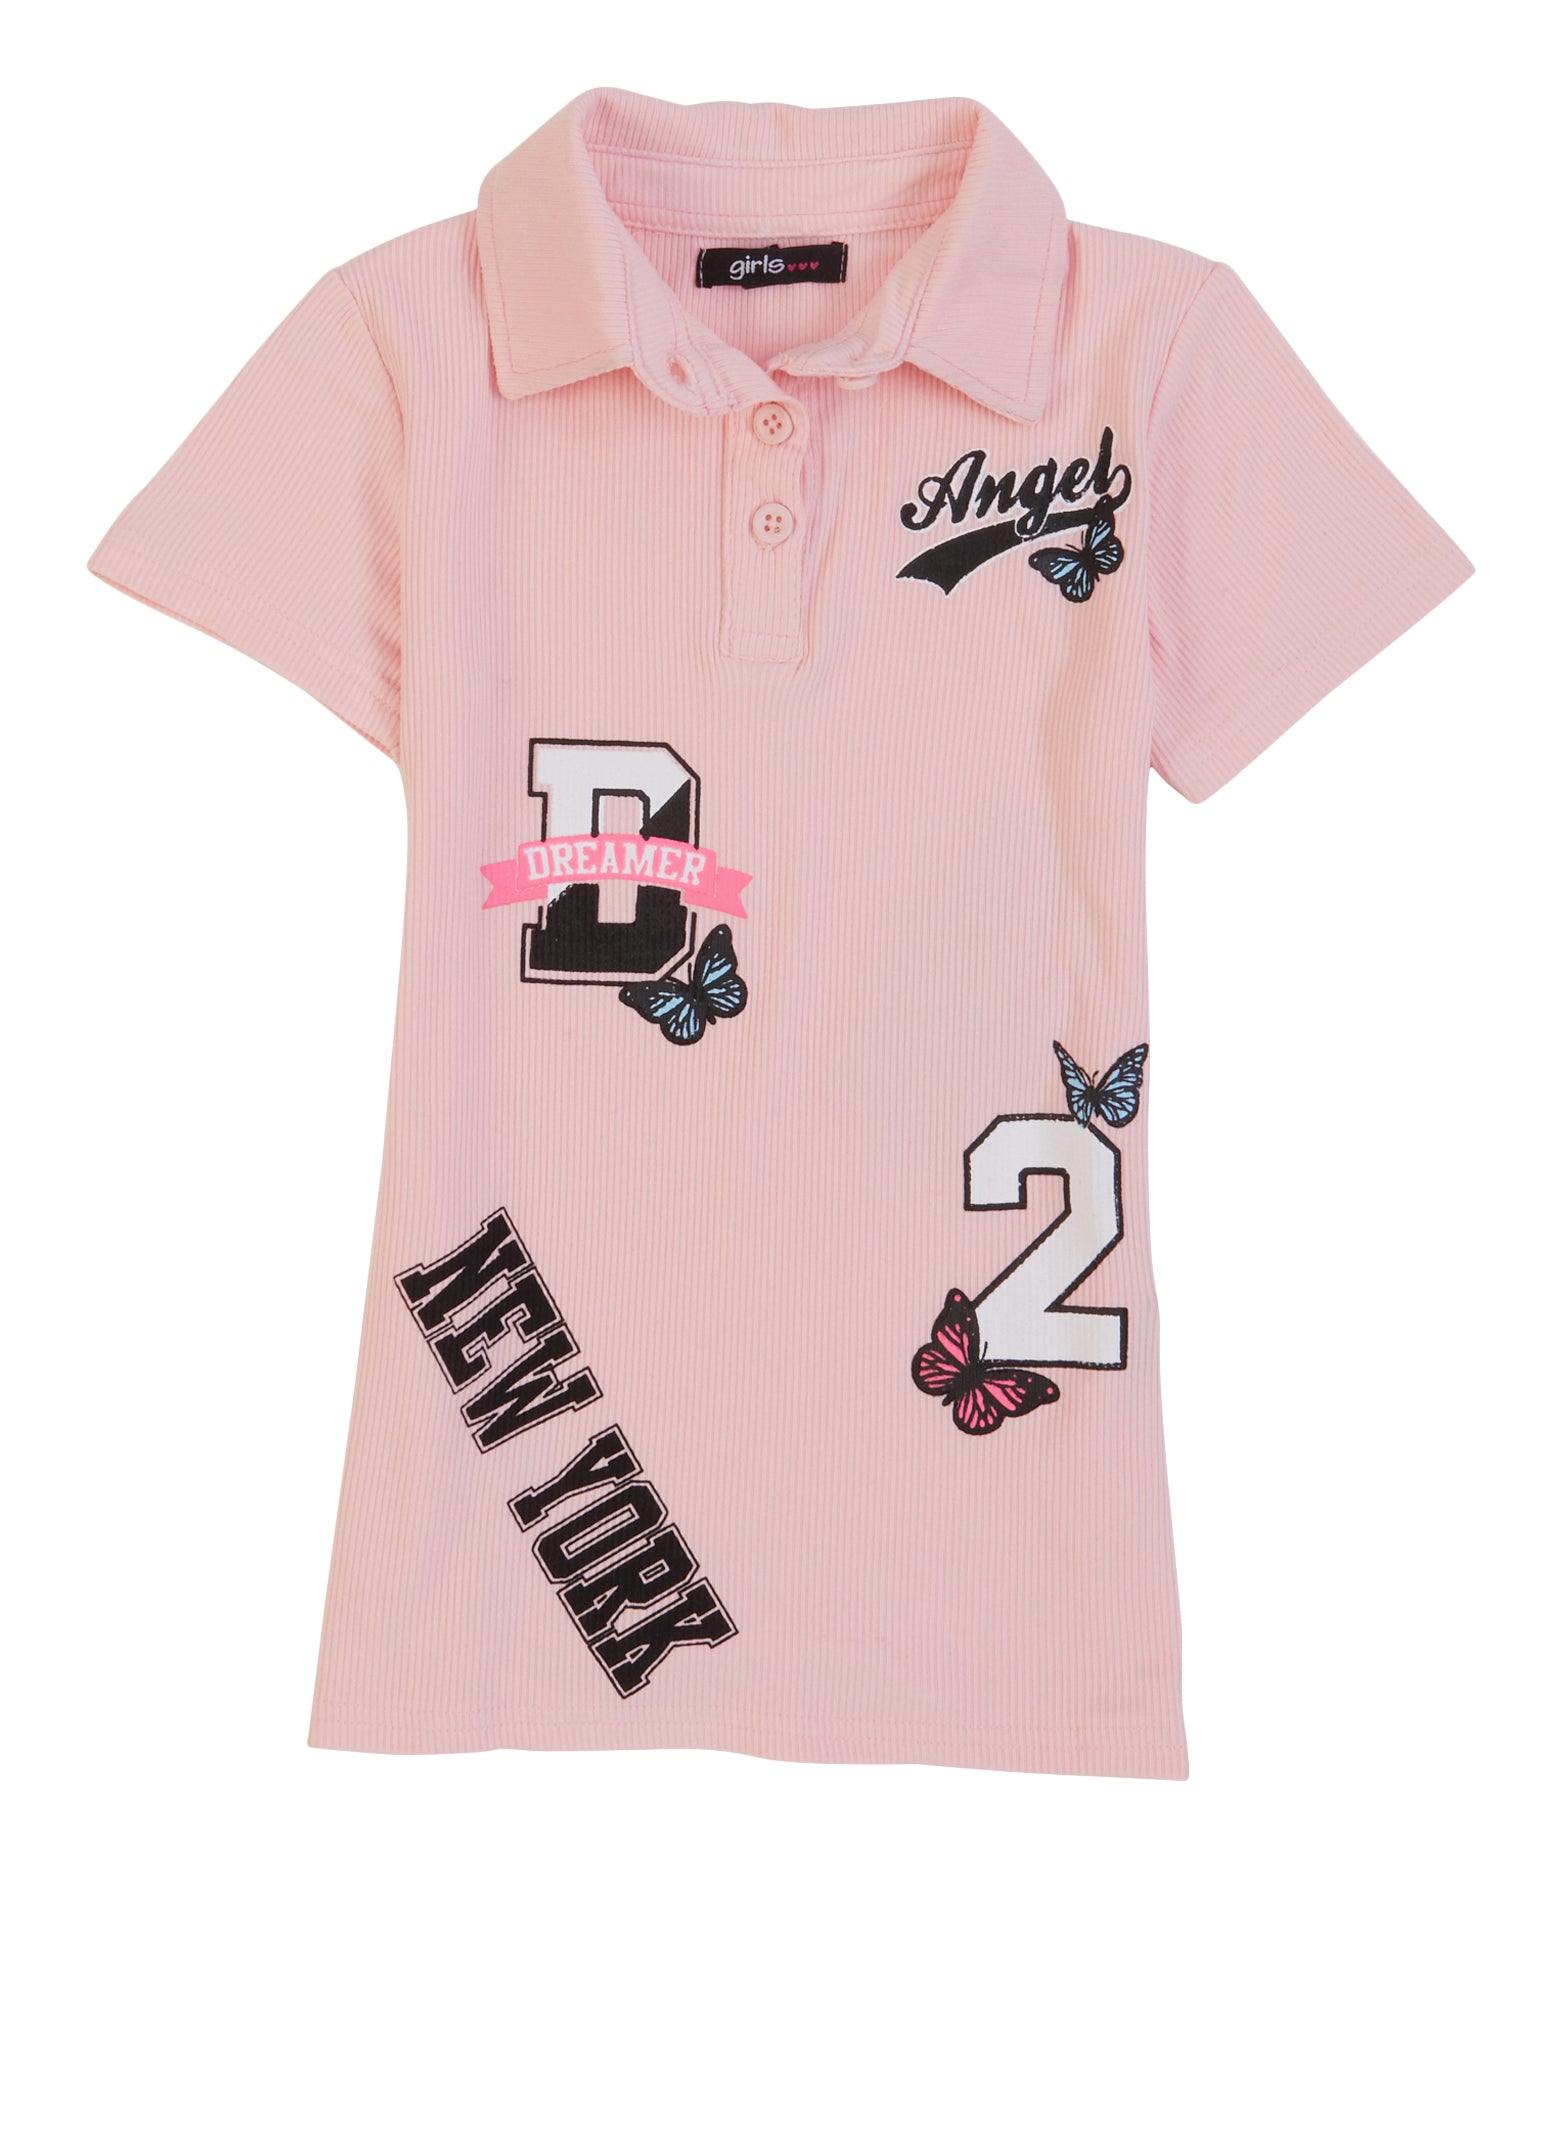 Toddler Girls Rib Knit Graphic Polo Dress, Pink, Size 2T